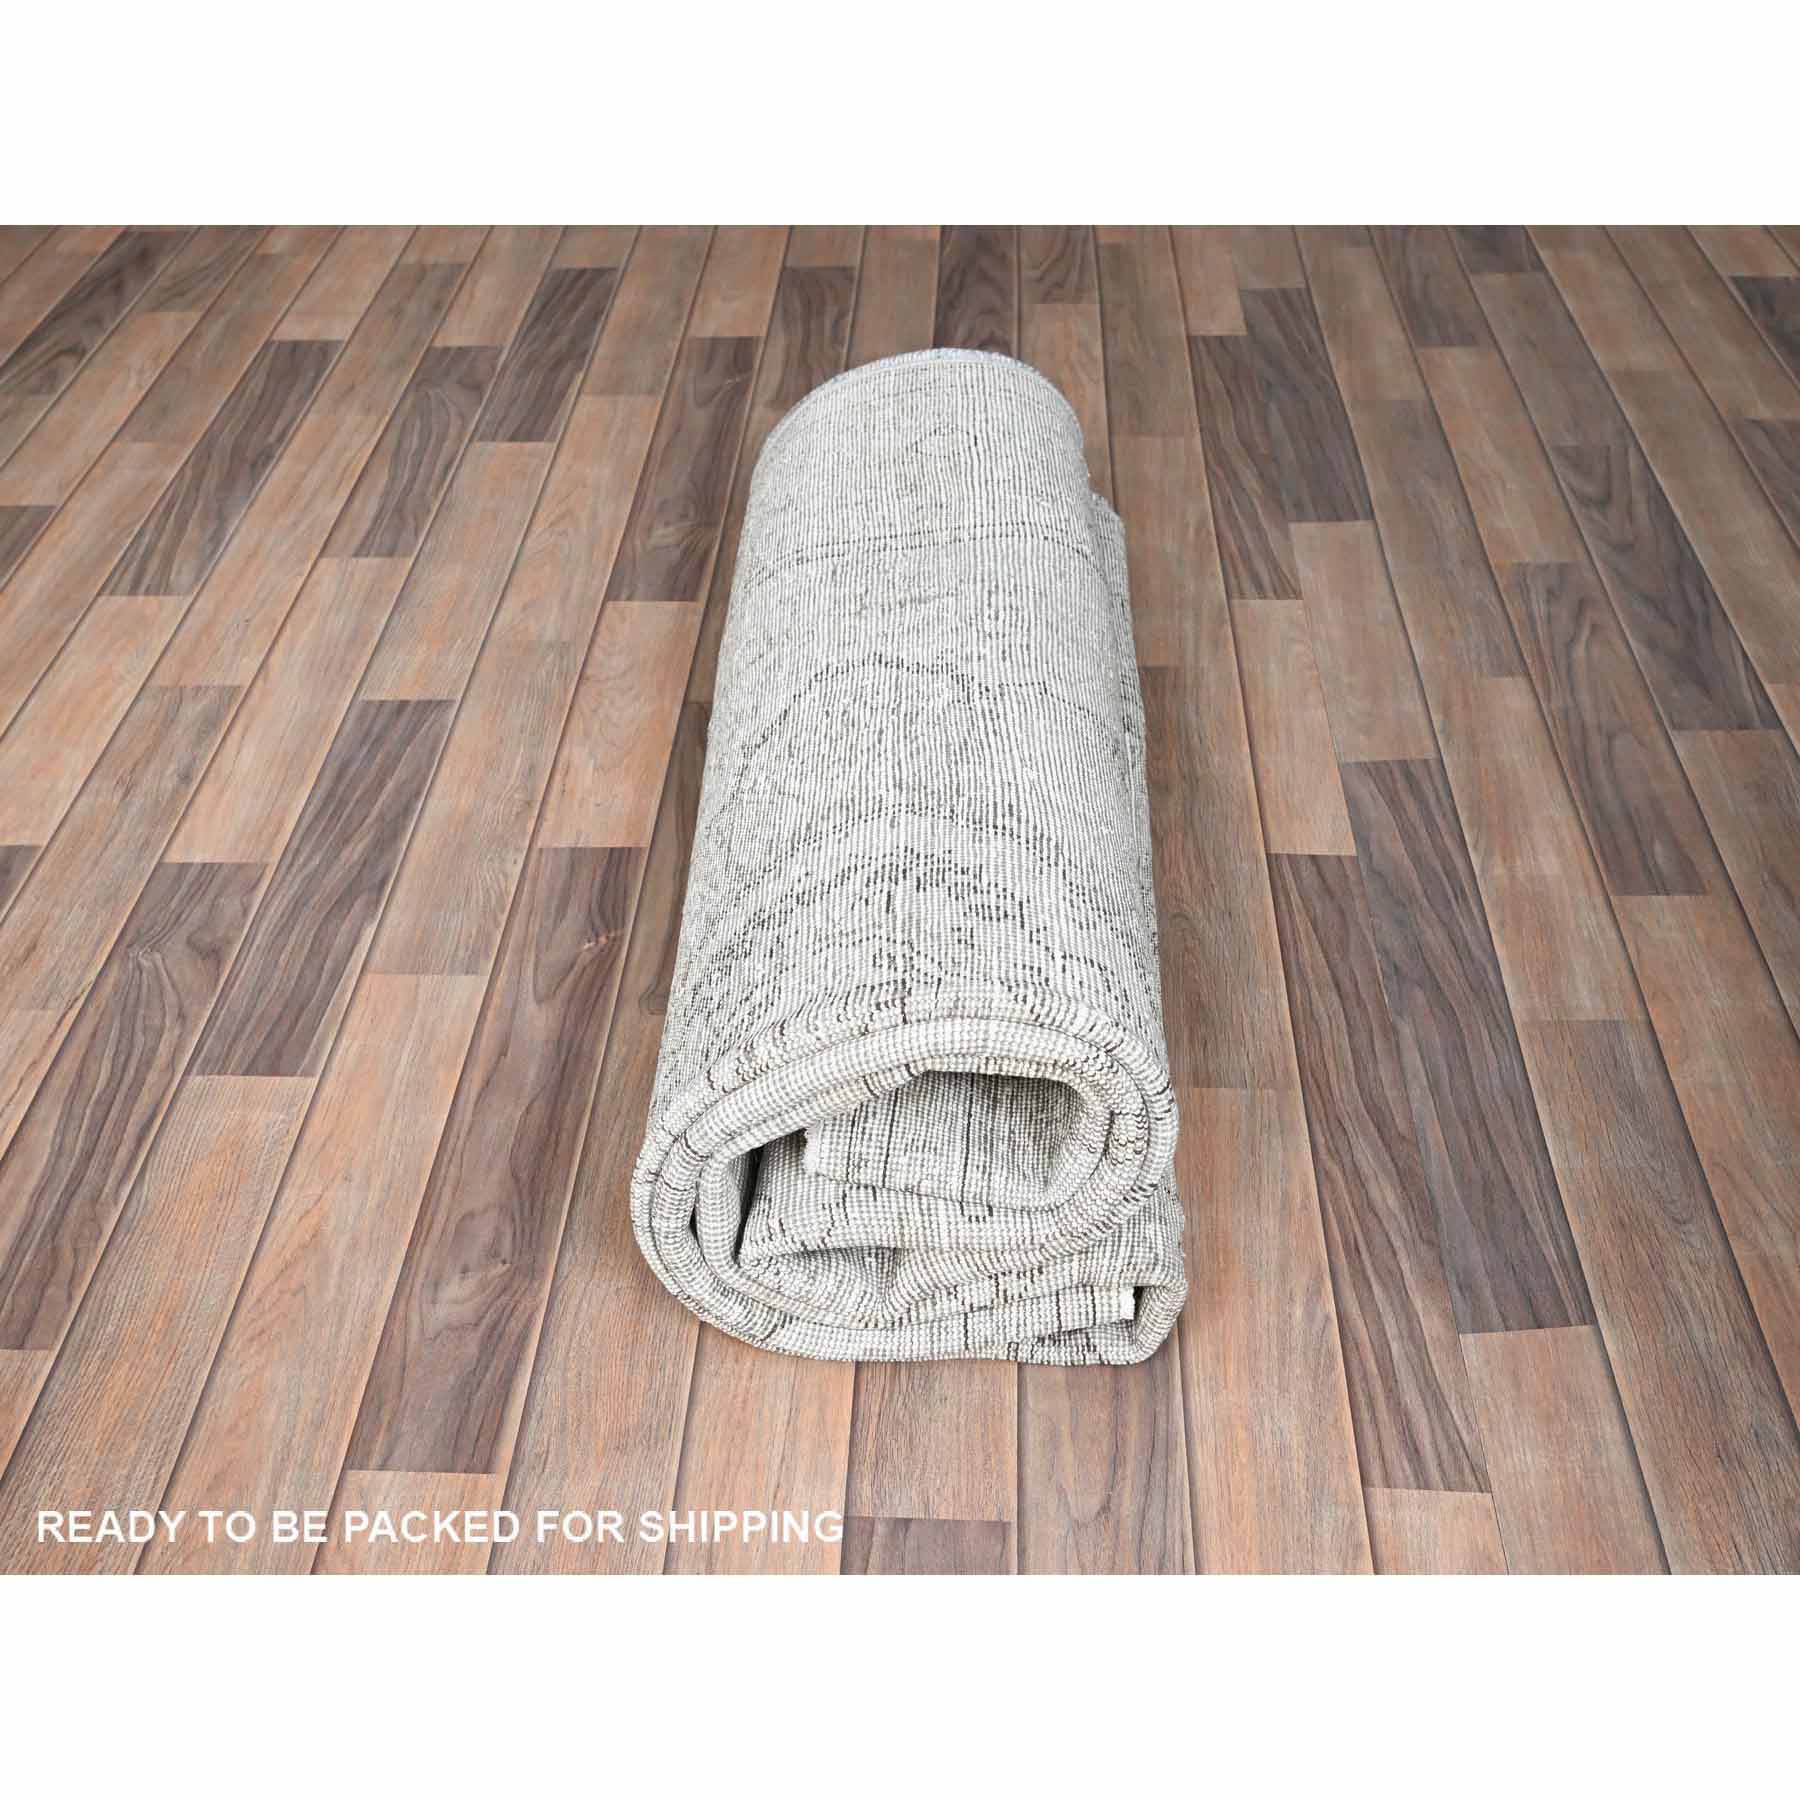 Overdyed-Vintage-Hand-Knotted-Rug-427010